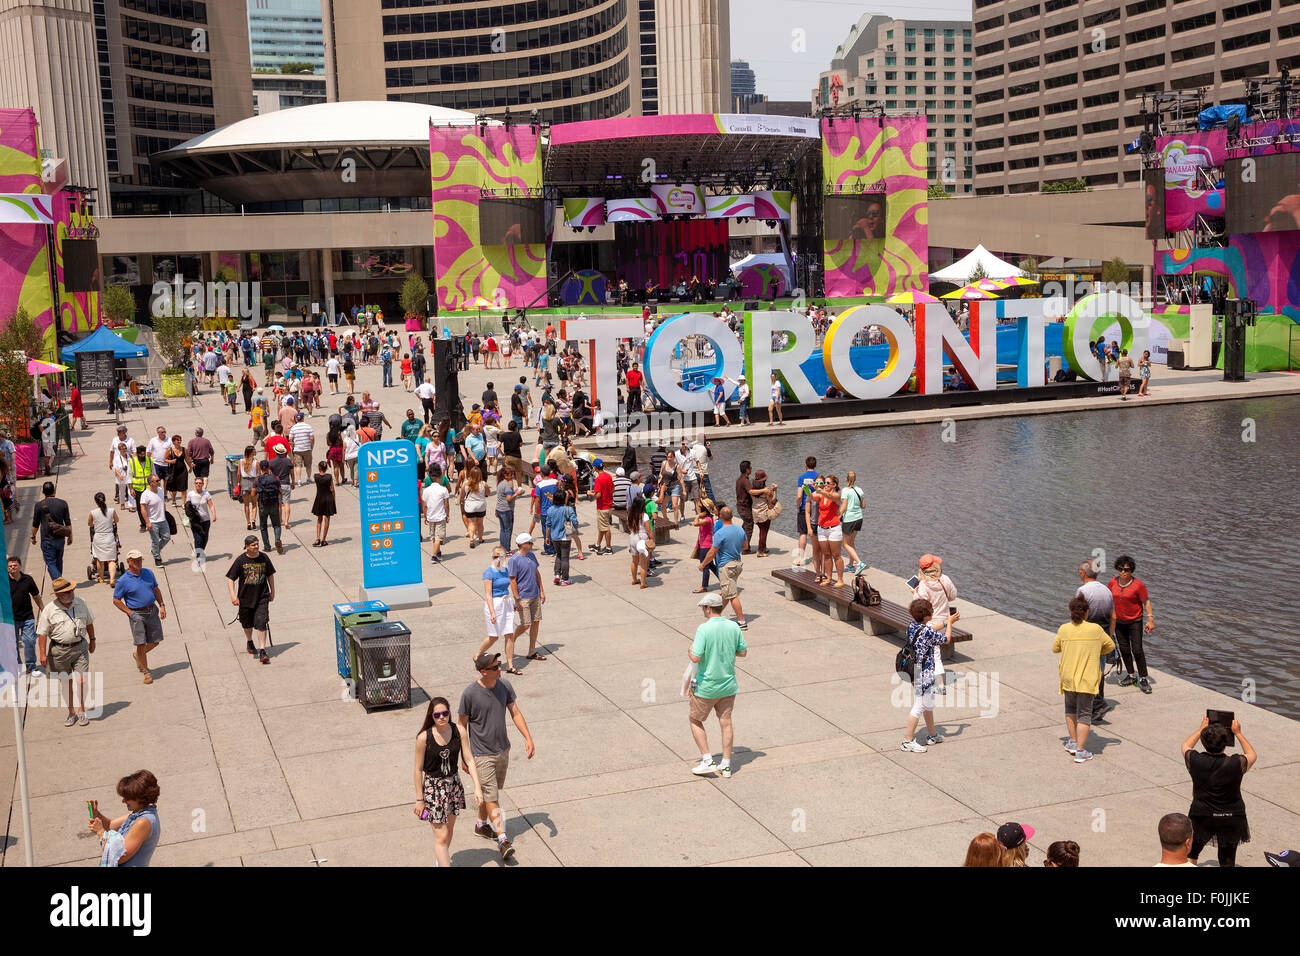 Toronto 2015 host city to the 2015 Pan Am/Parapan Games and Panamania in Toronto;Ontario;Canada;celebration at City Hall Square Stock Photo